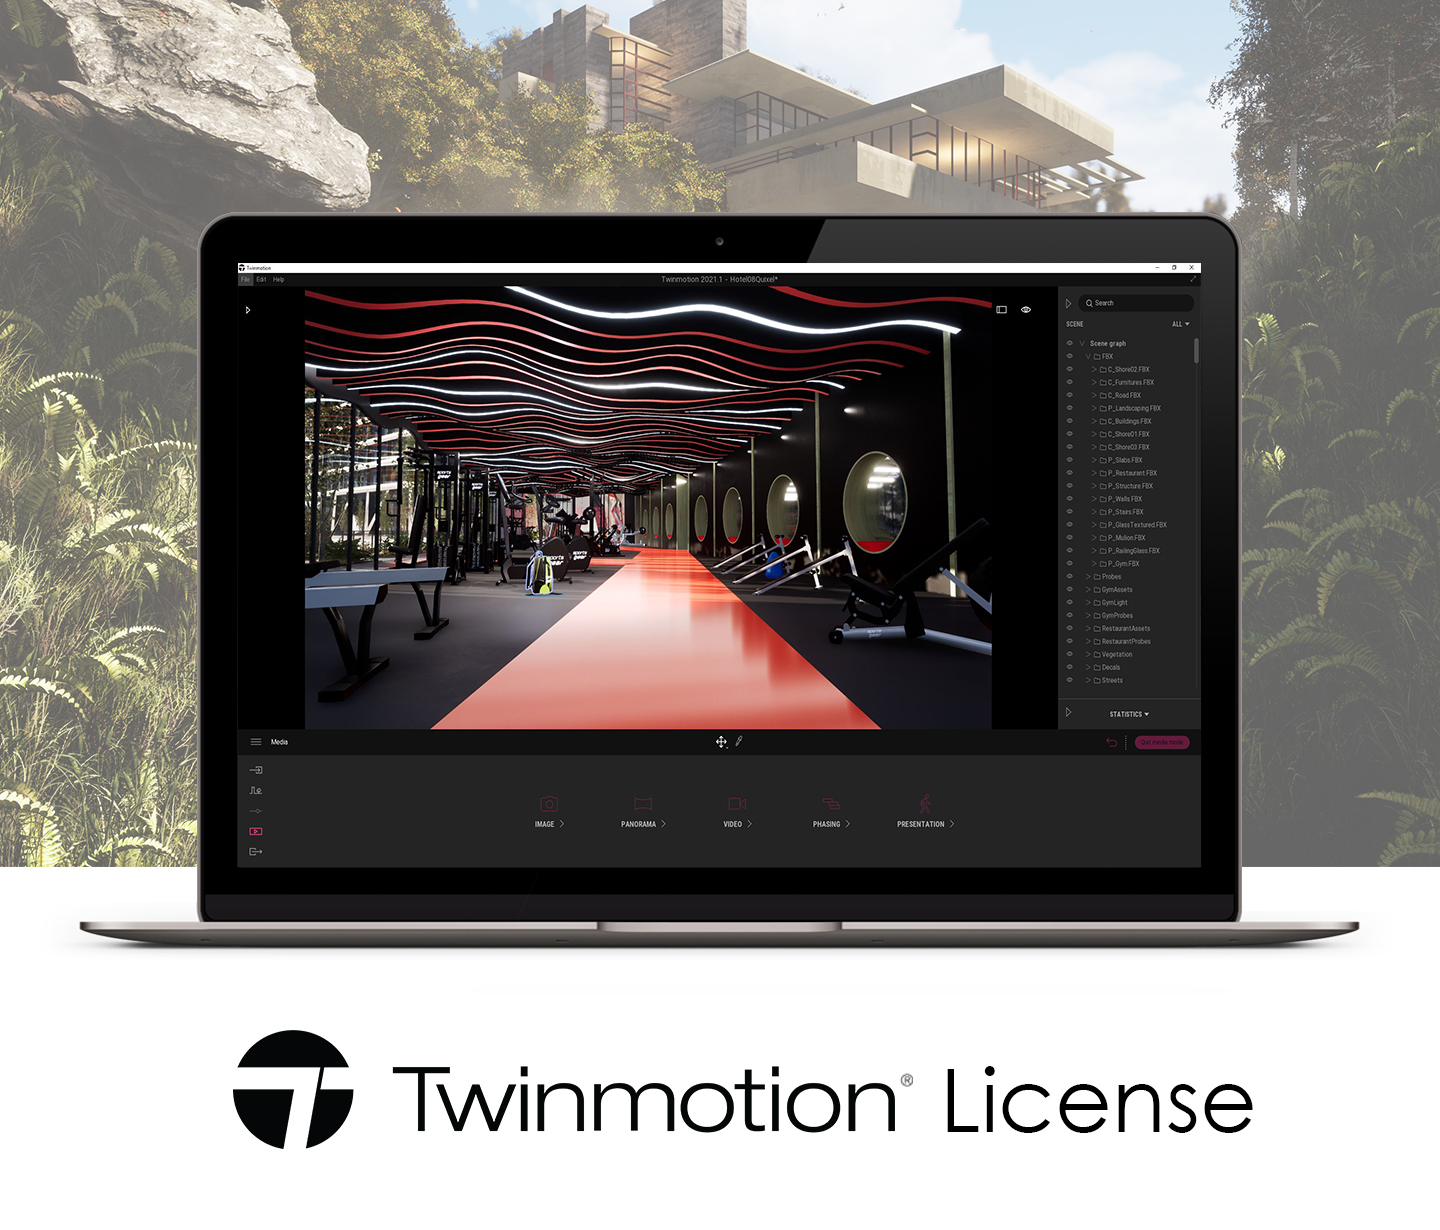 twinmotion system requirements 2021